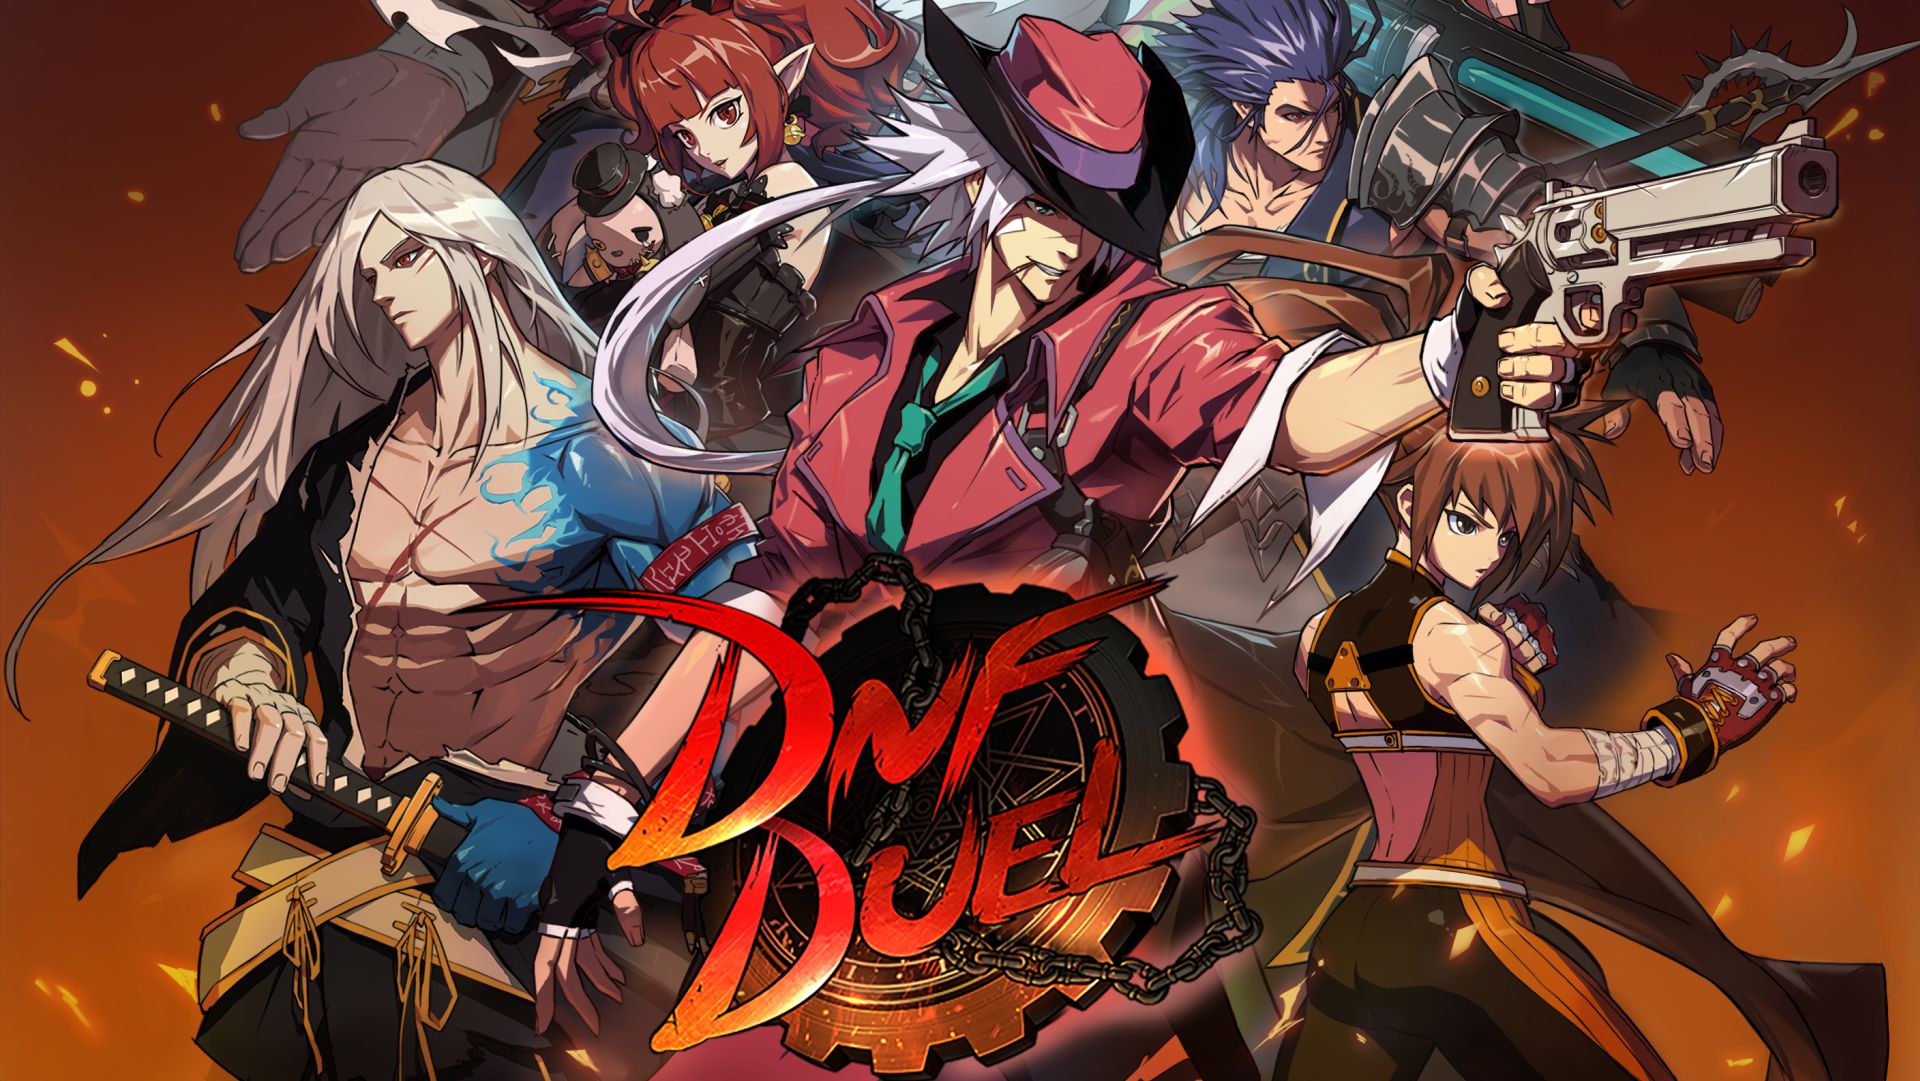 DNF Duel is Free on the Epic Games Store